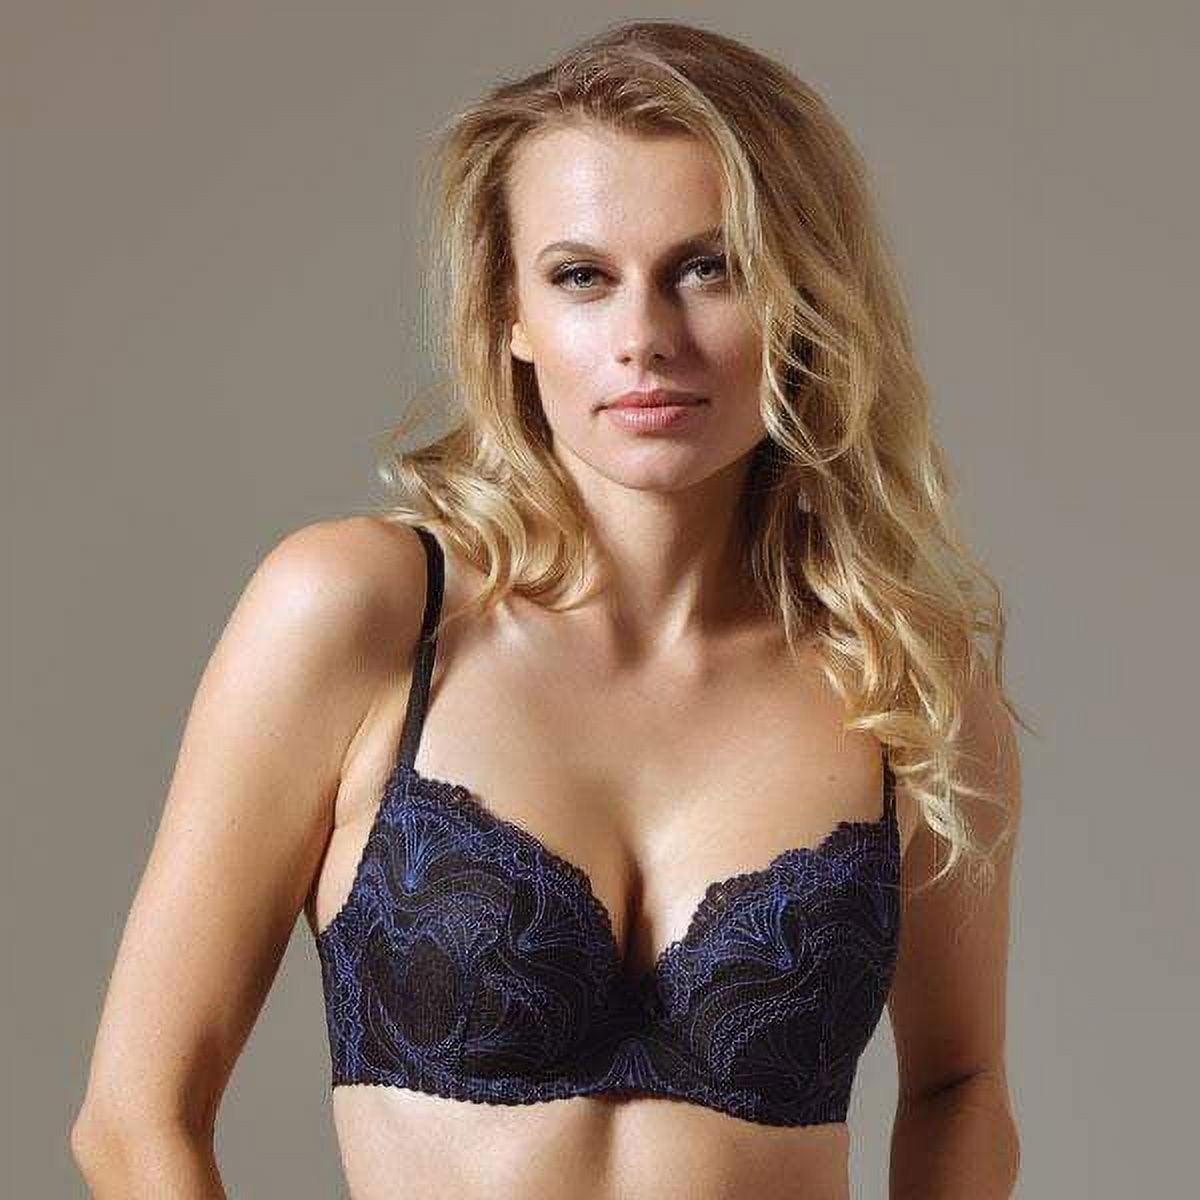 Cacique Bra Size 38DDD Beige with Beautiful Black Lace Overlay Four Hook